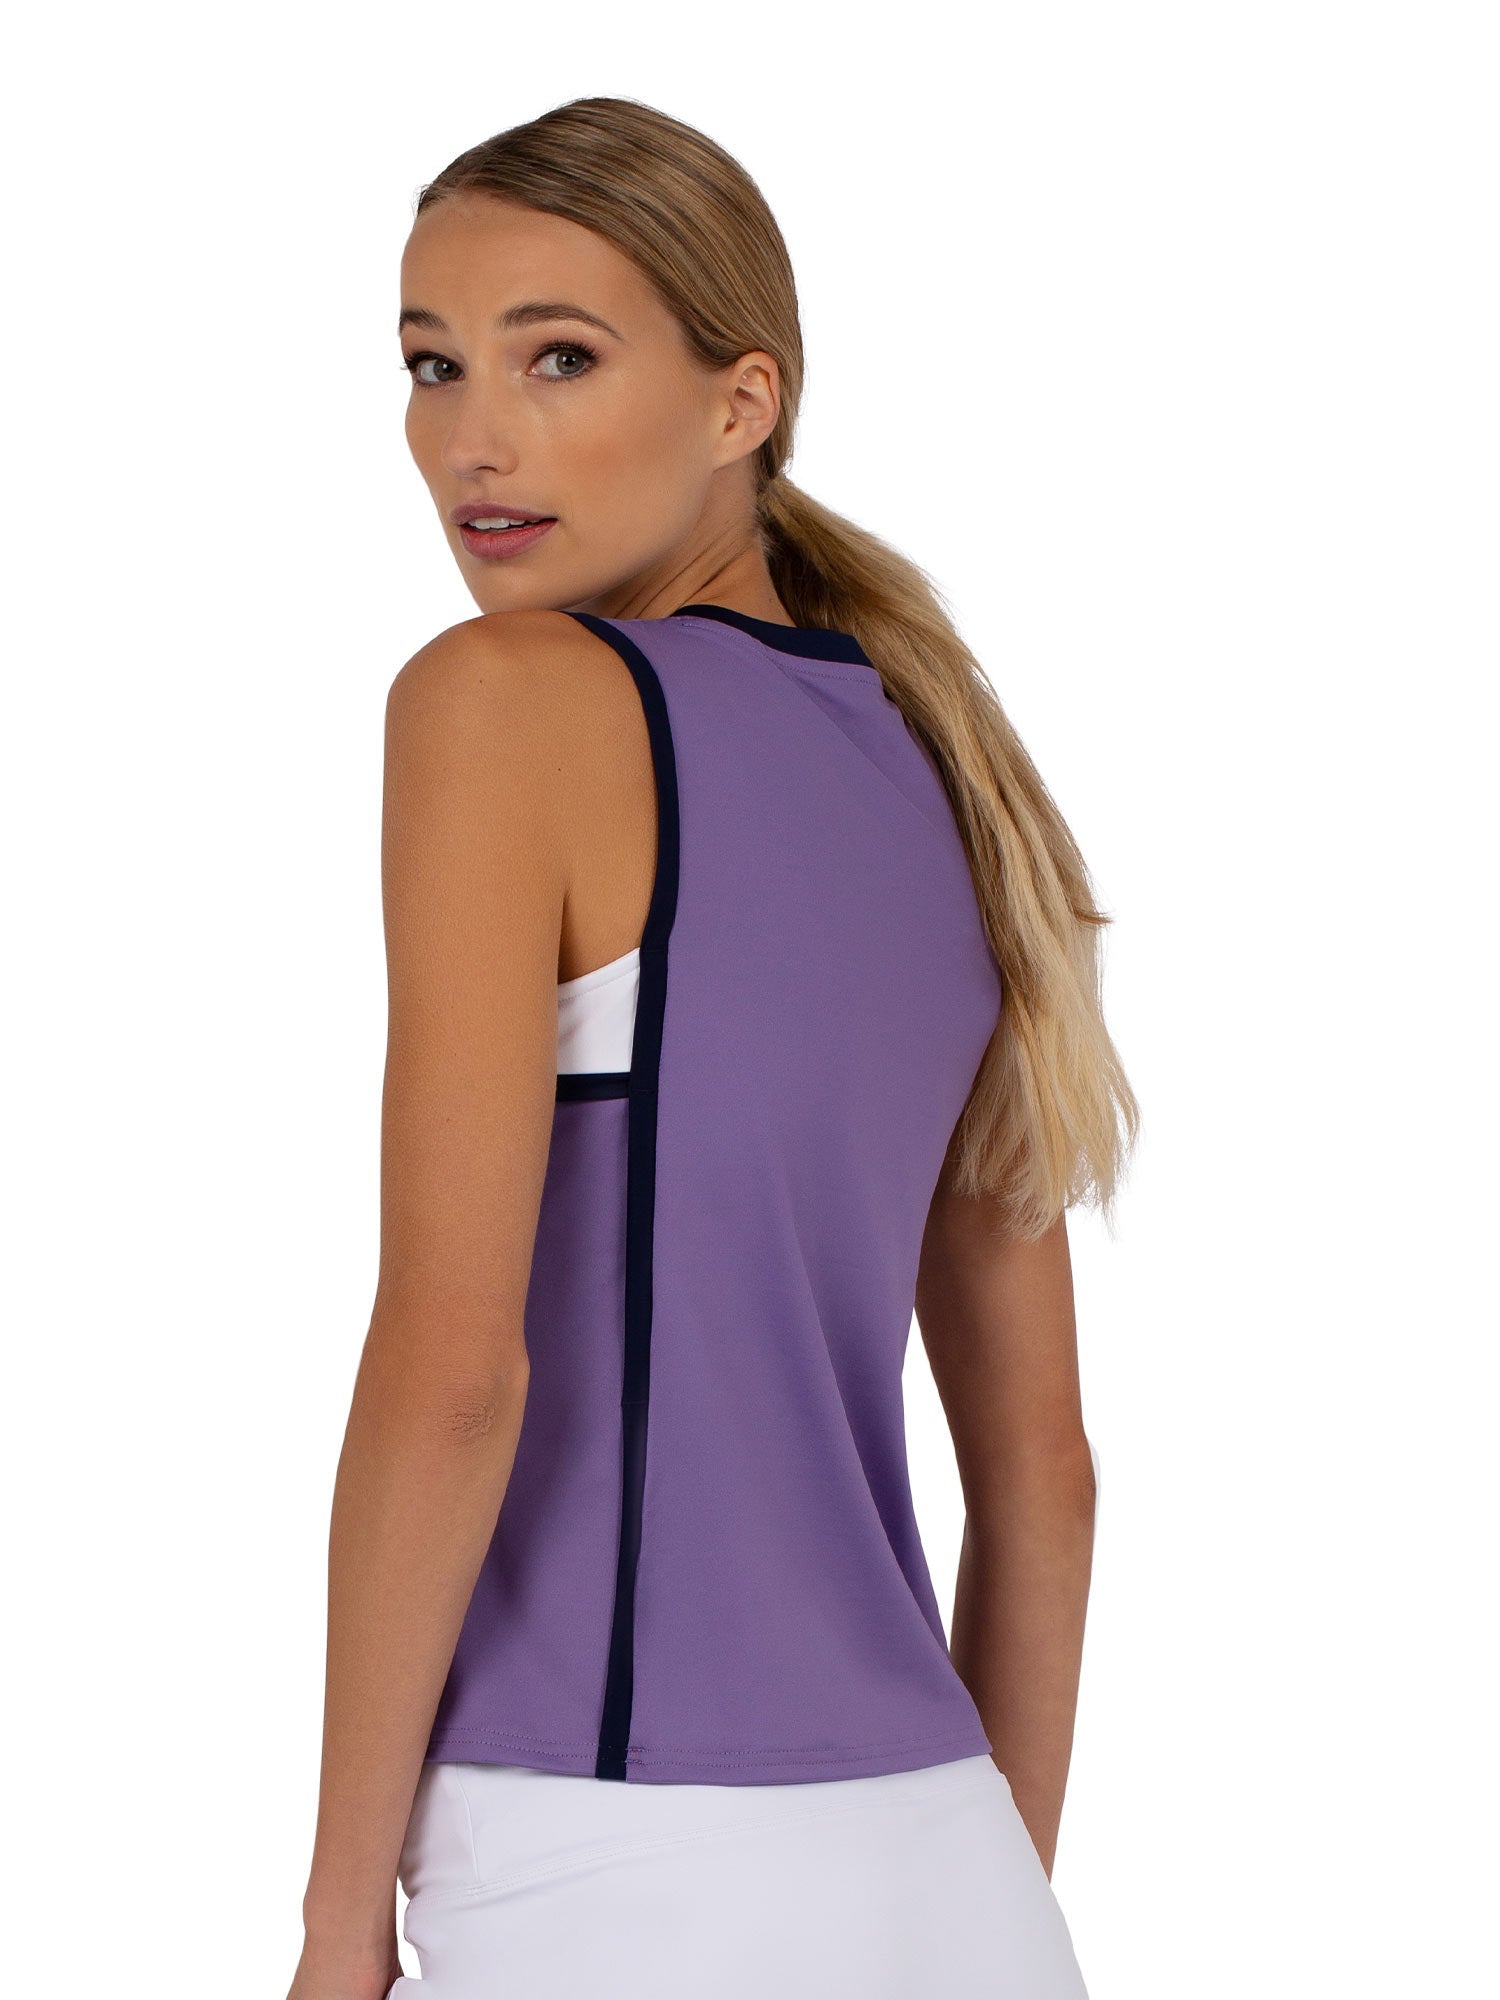 Back view of model wearing the Hazel tennis tank top in lavender and ink by inPhorm NYC